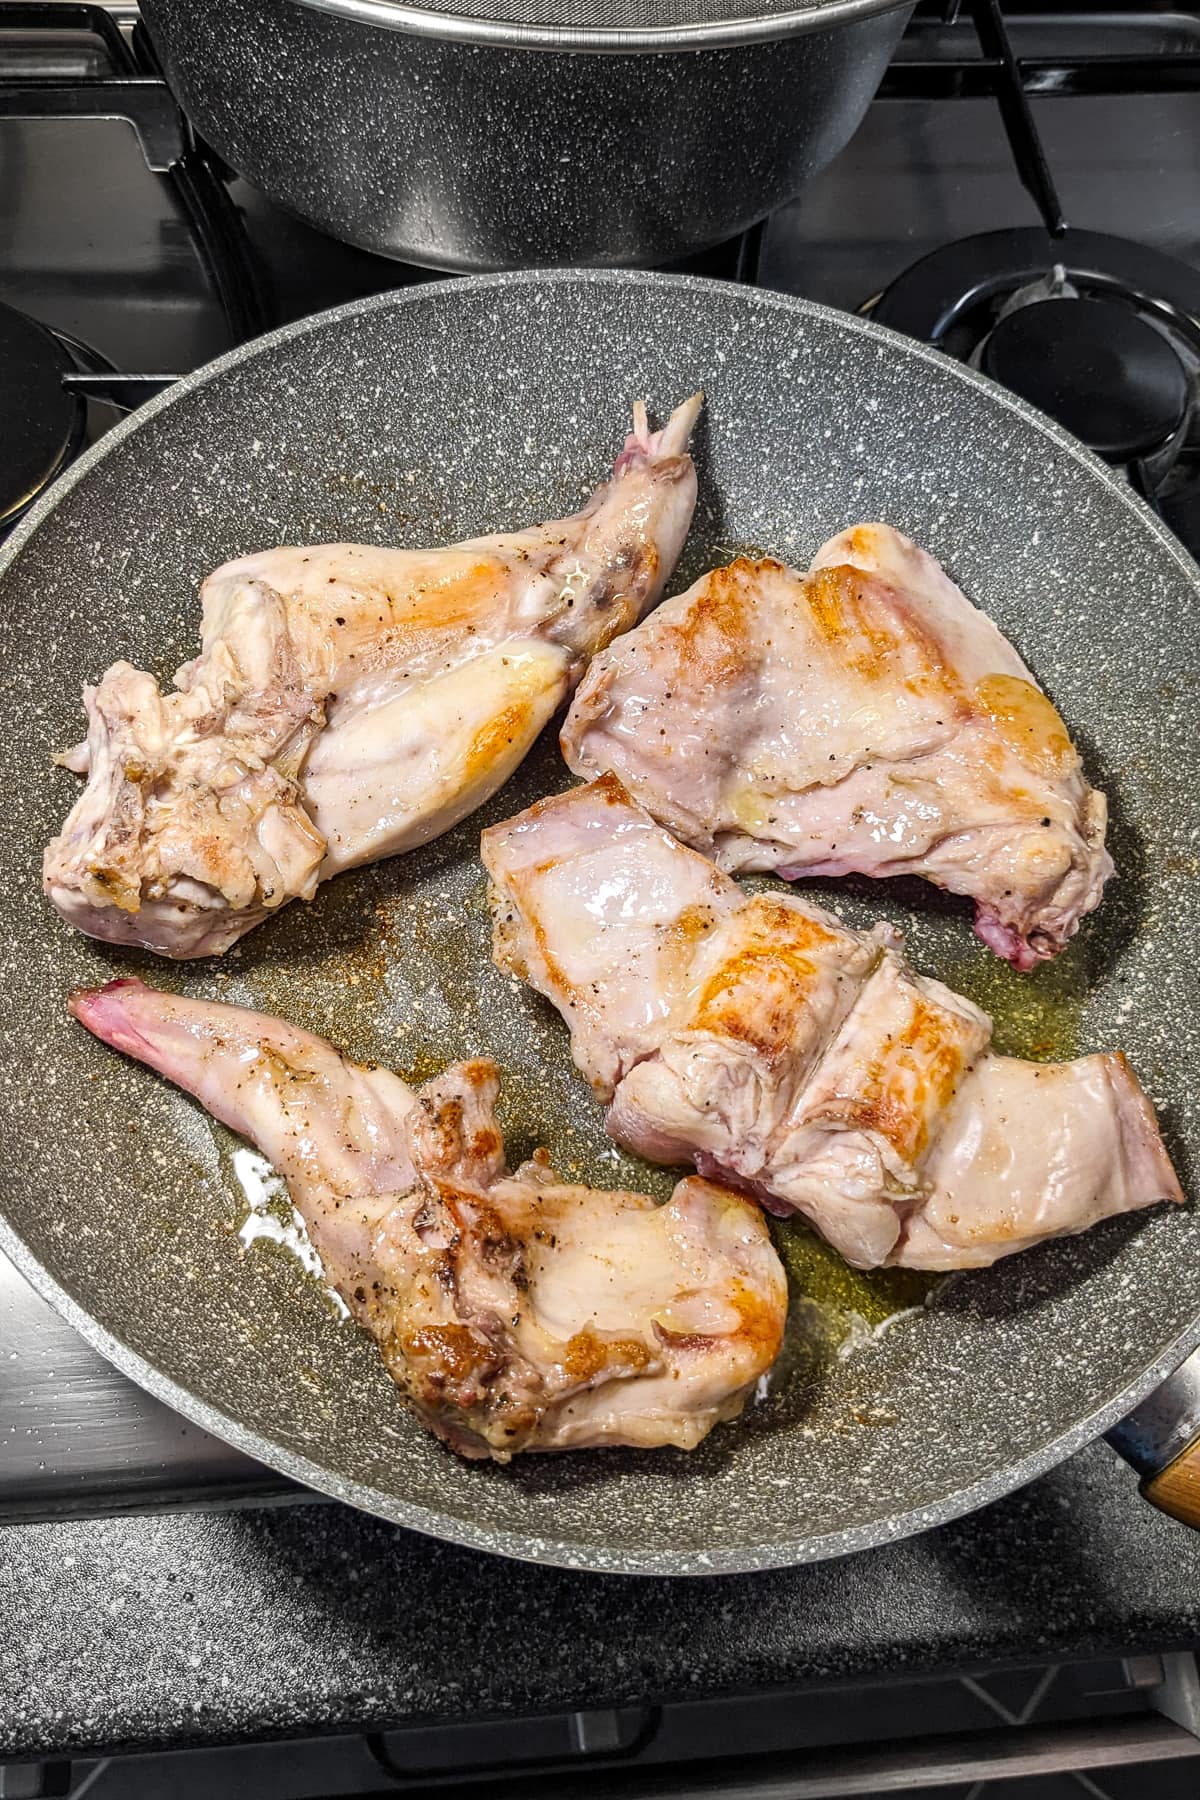 Fried rabbit meat on a stove in a frying pan.